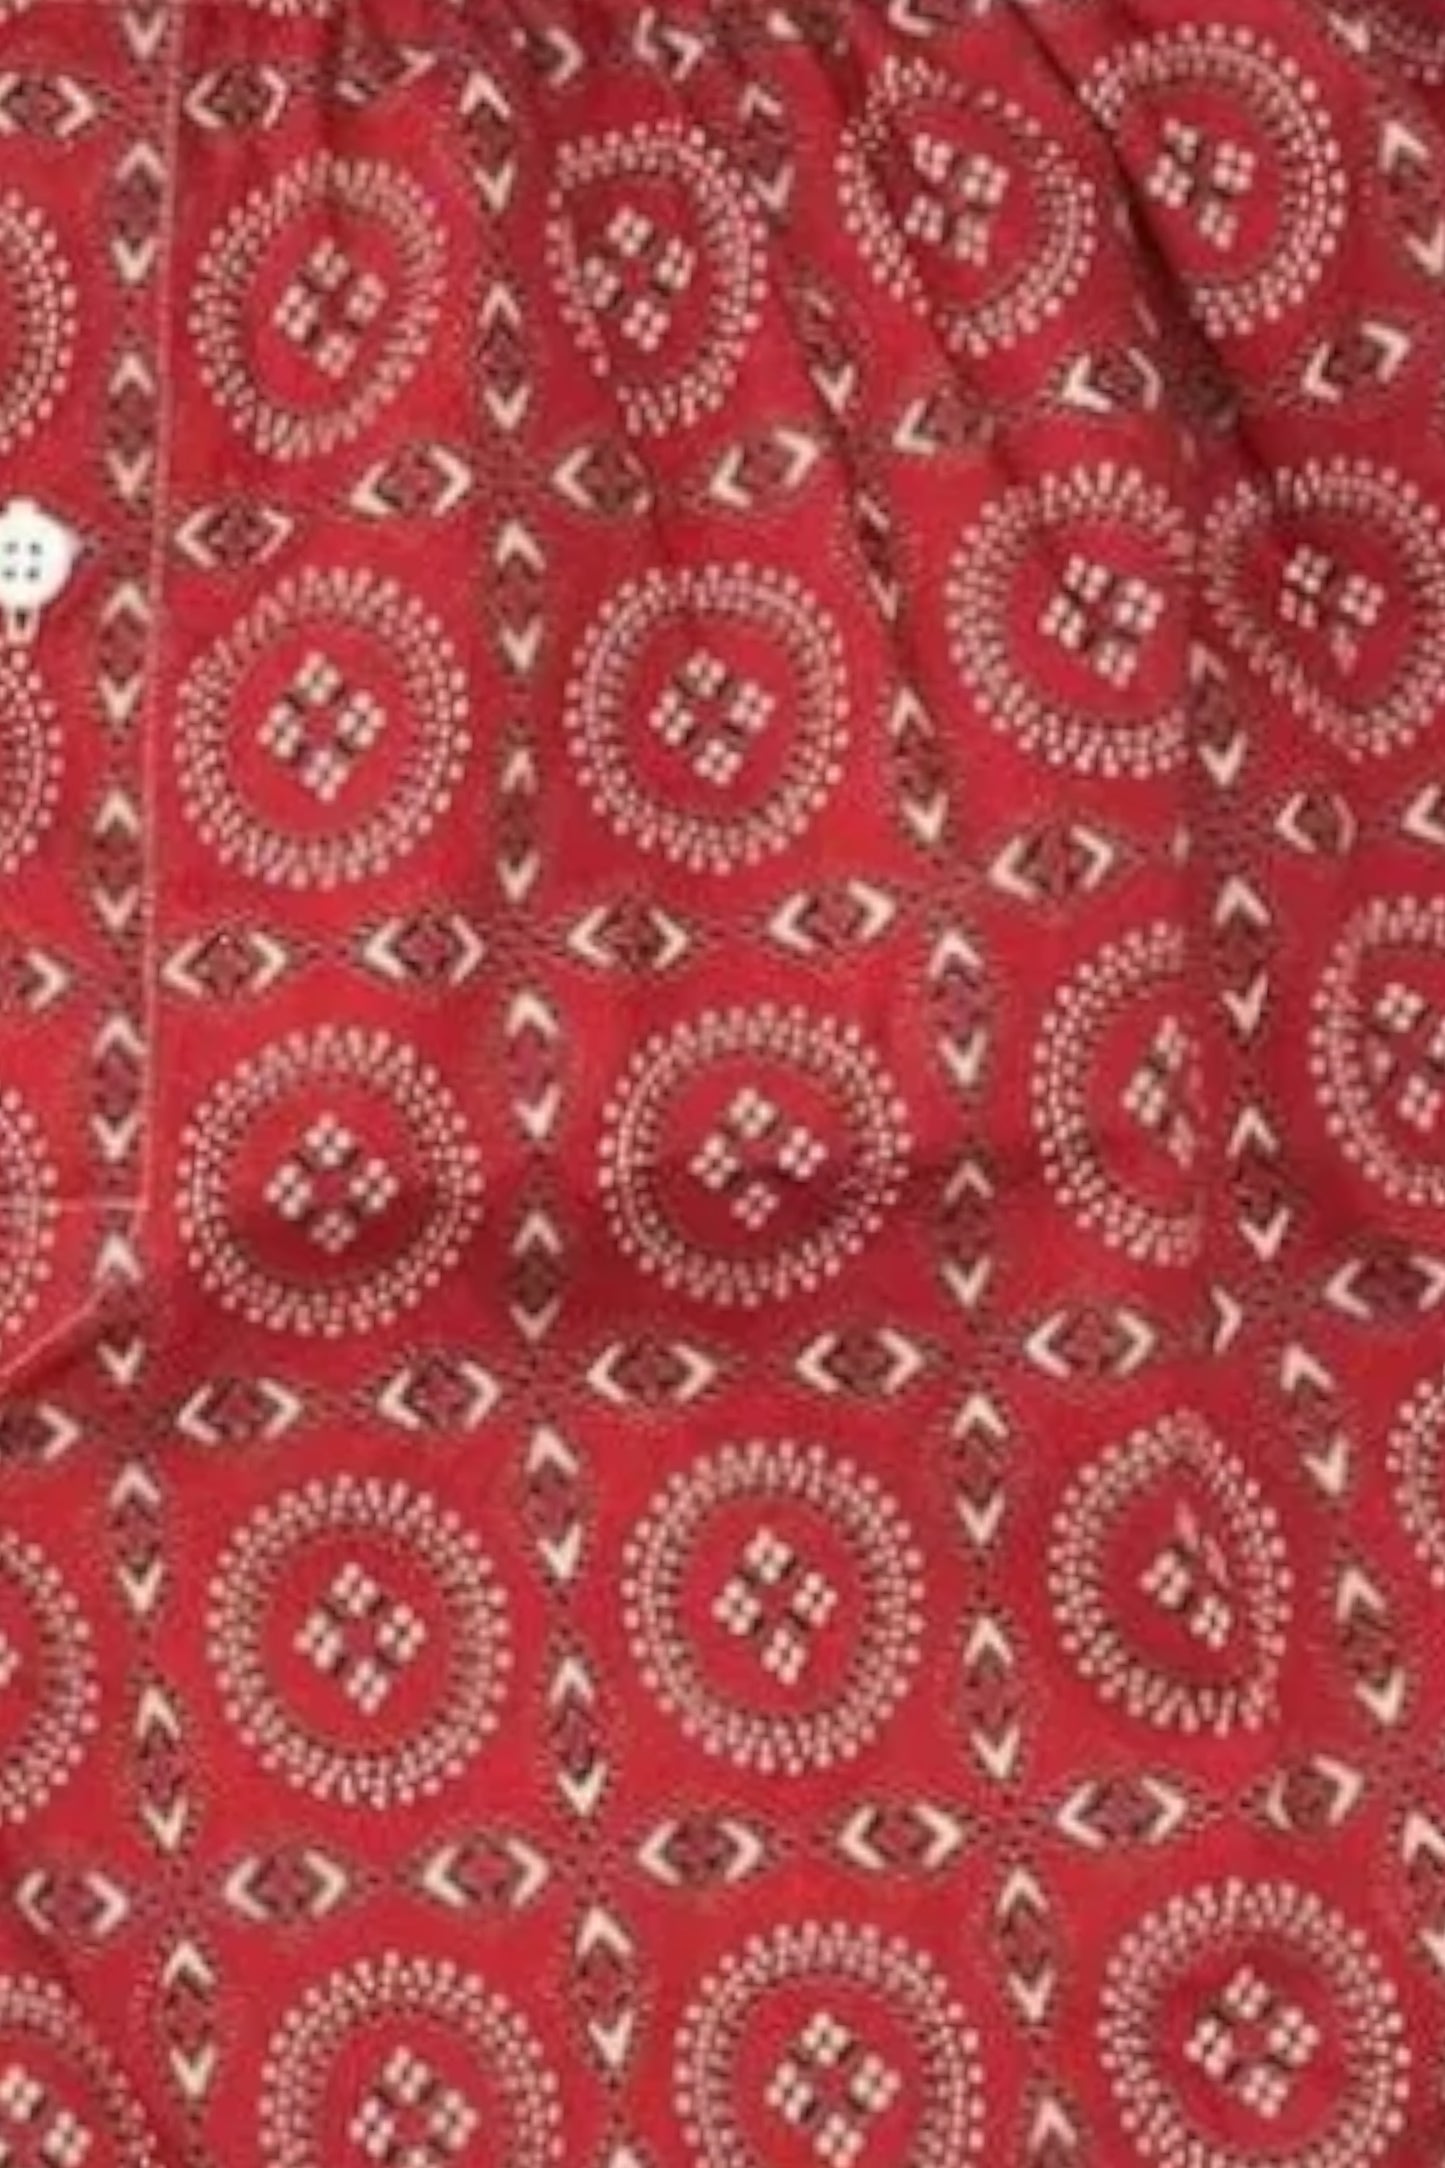 Anonymous Ism - Vintage Bandana Print Boxers (Red)